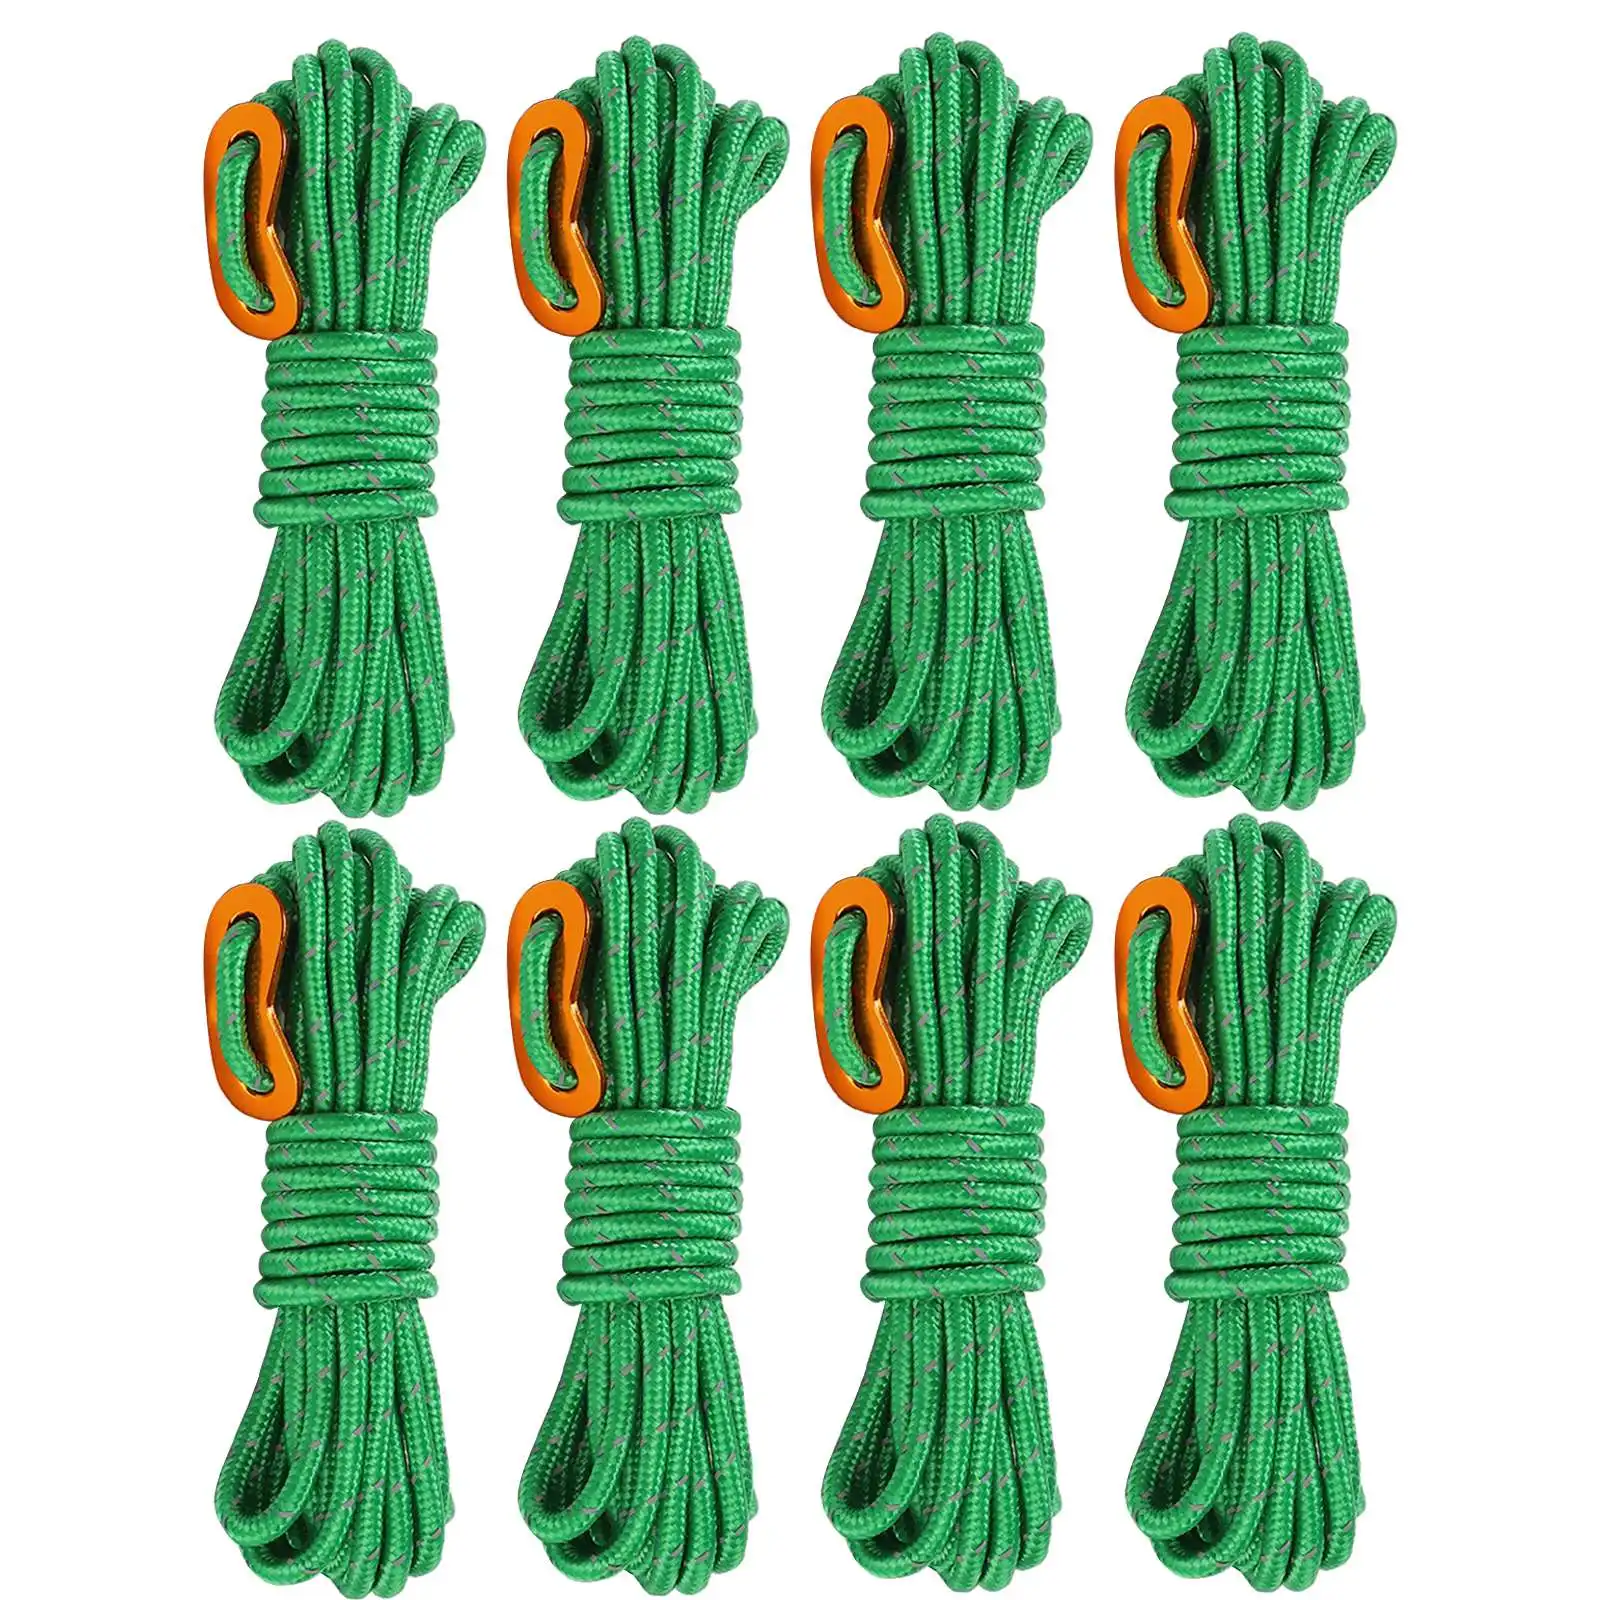 8pcs/Set 4mm Strong Tent Ropes Camping Adjustment Buckle Windproof Cord Hiking Outdoor Glow In The Dark Rope